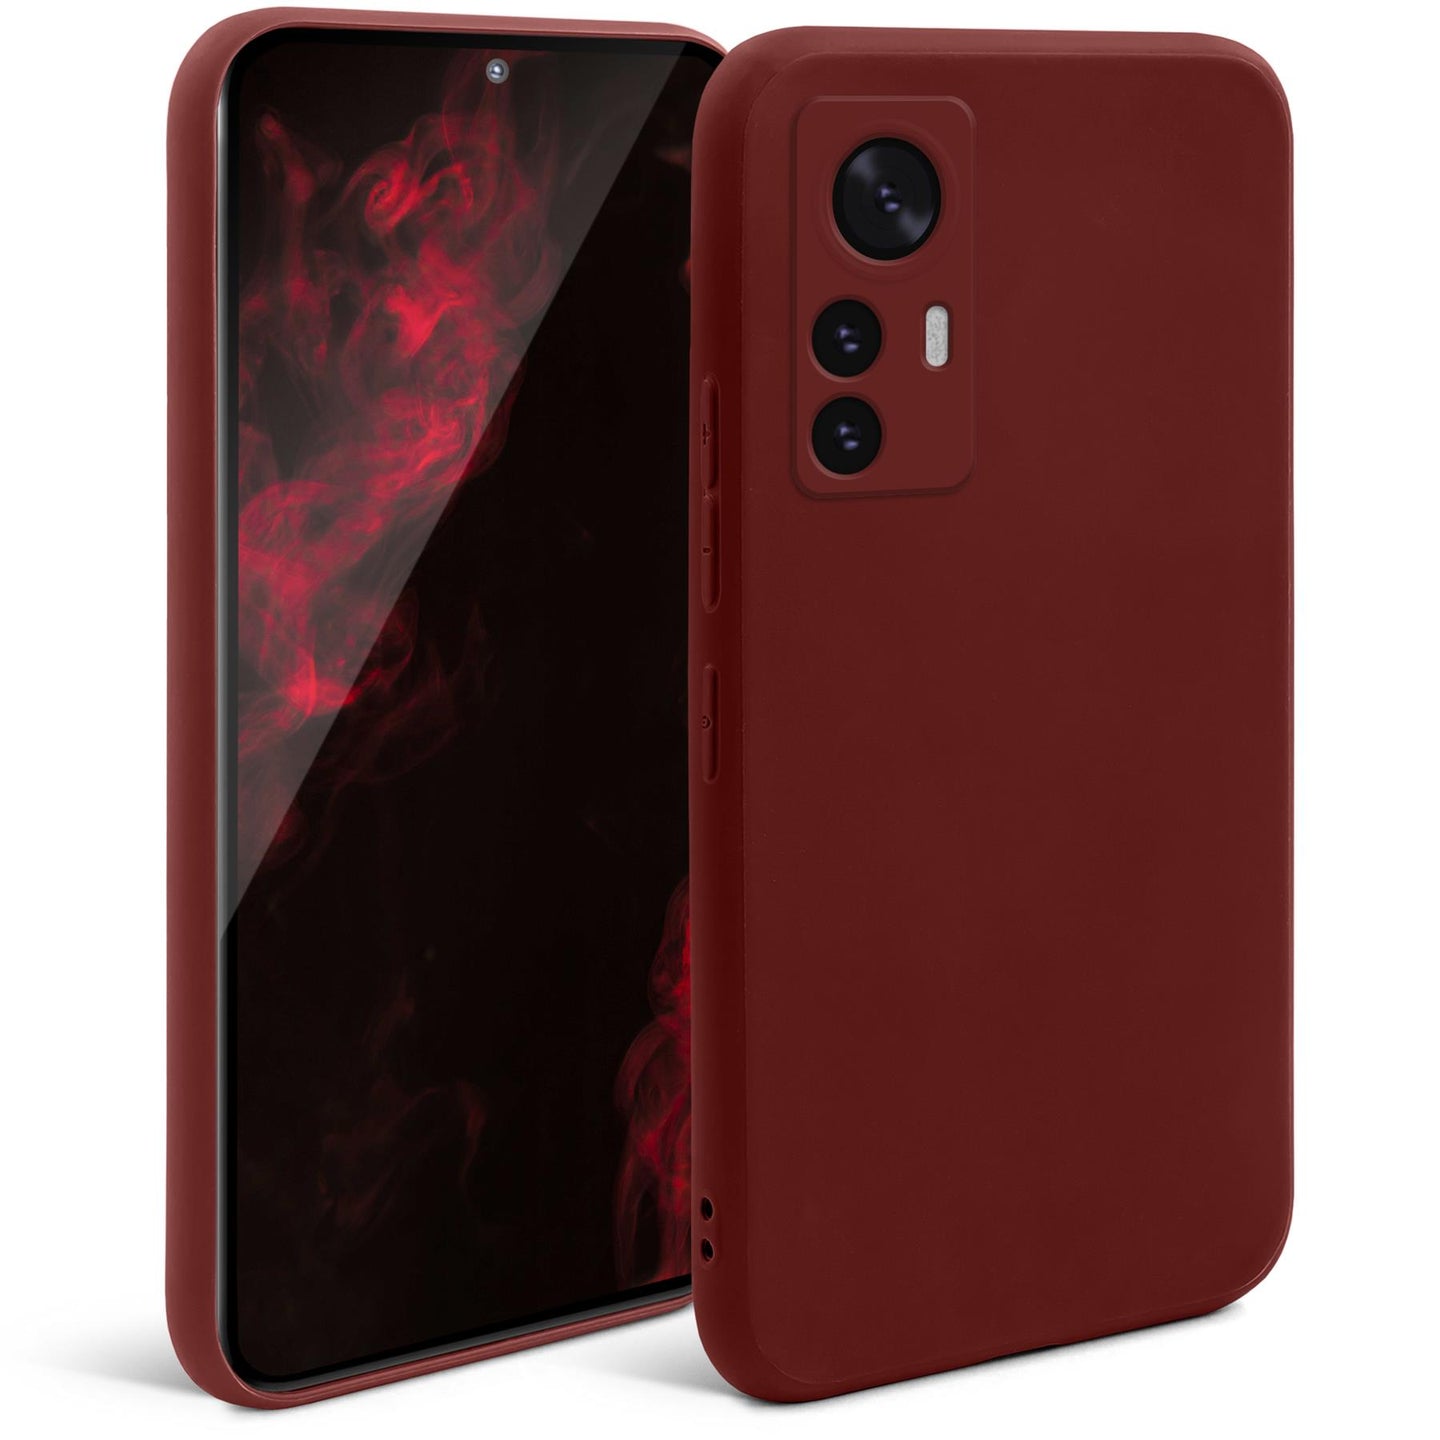 Moozy Minimalist Series Silicone Case for Xiaomi 12 and Xiaomi 12X, Wine Red - Matte Finish Lightweight Mobile Phone Case Slim Soft Protective TPU Cover with Matte Surface